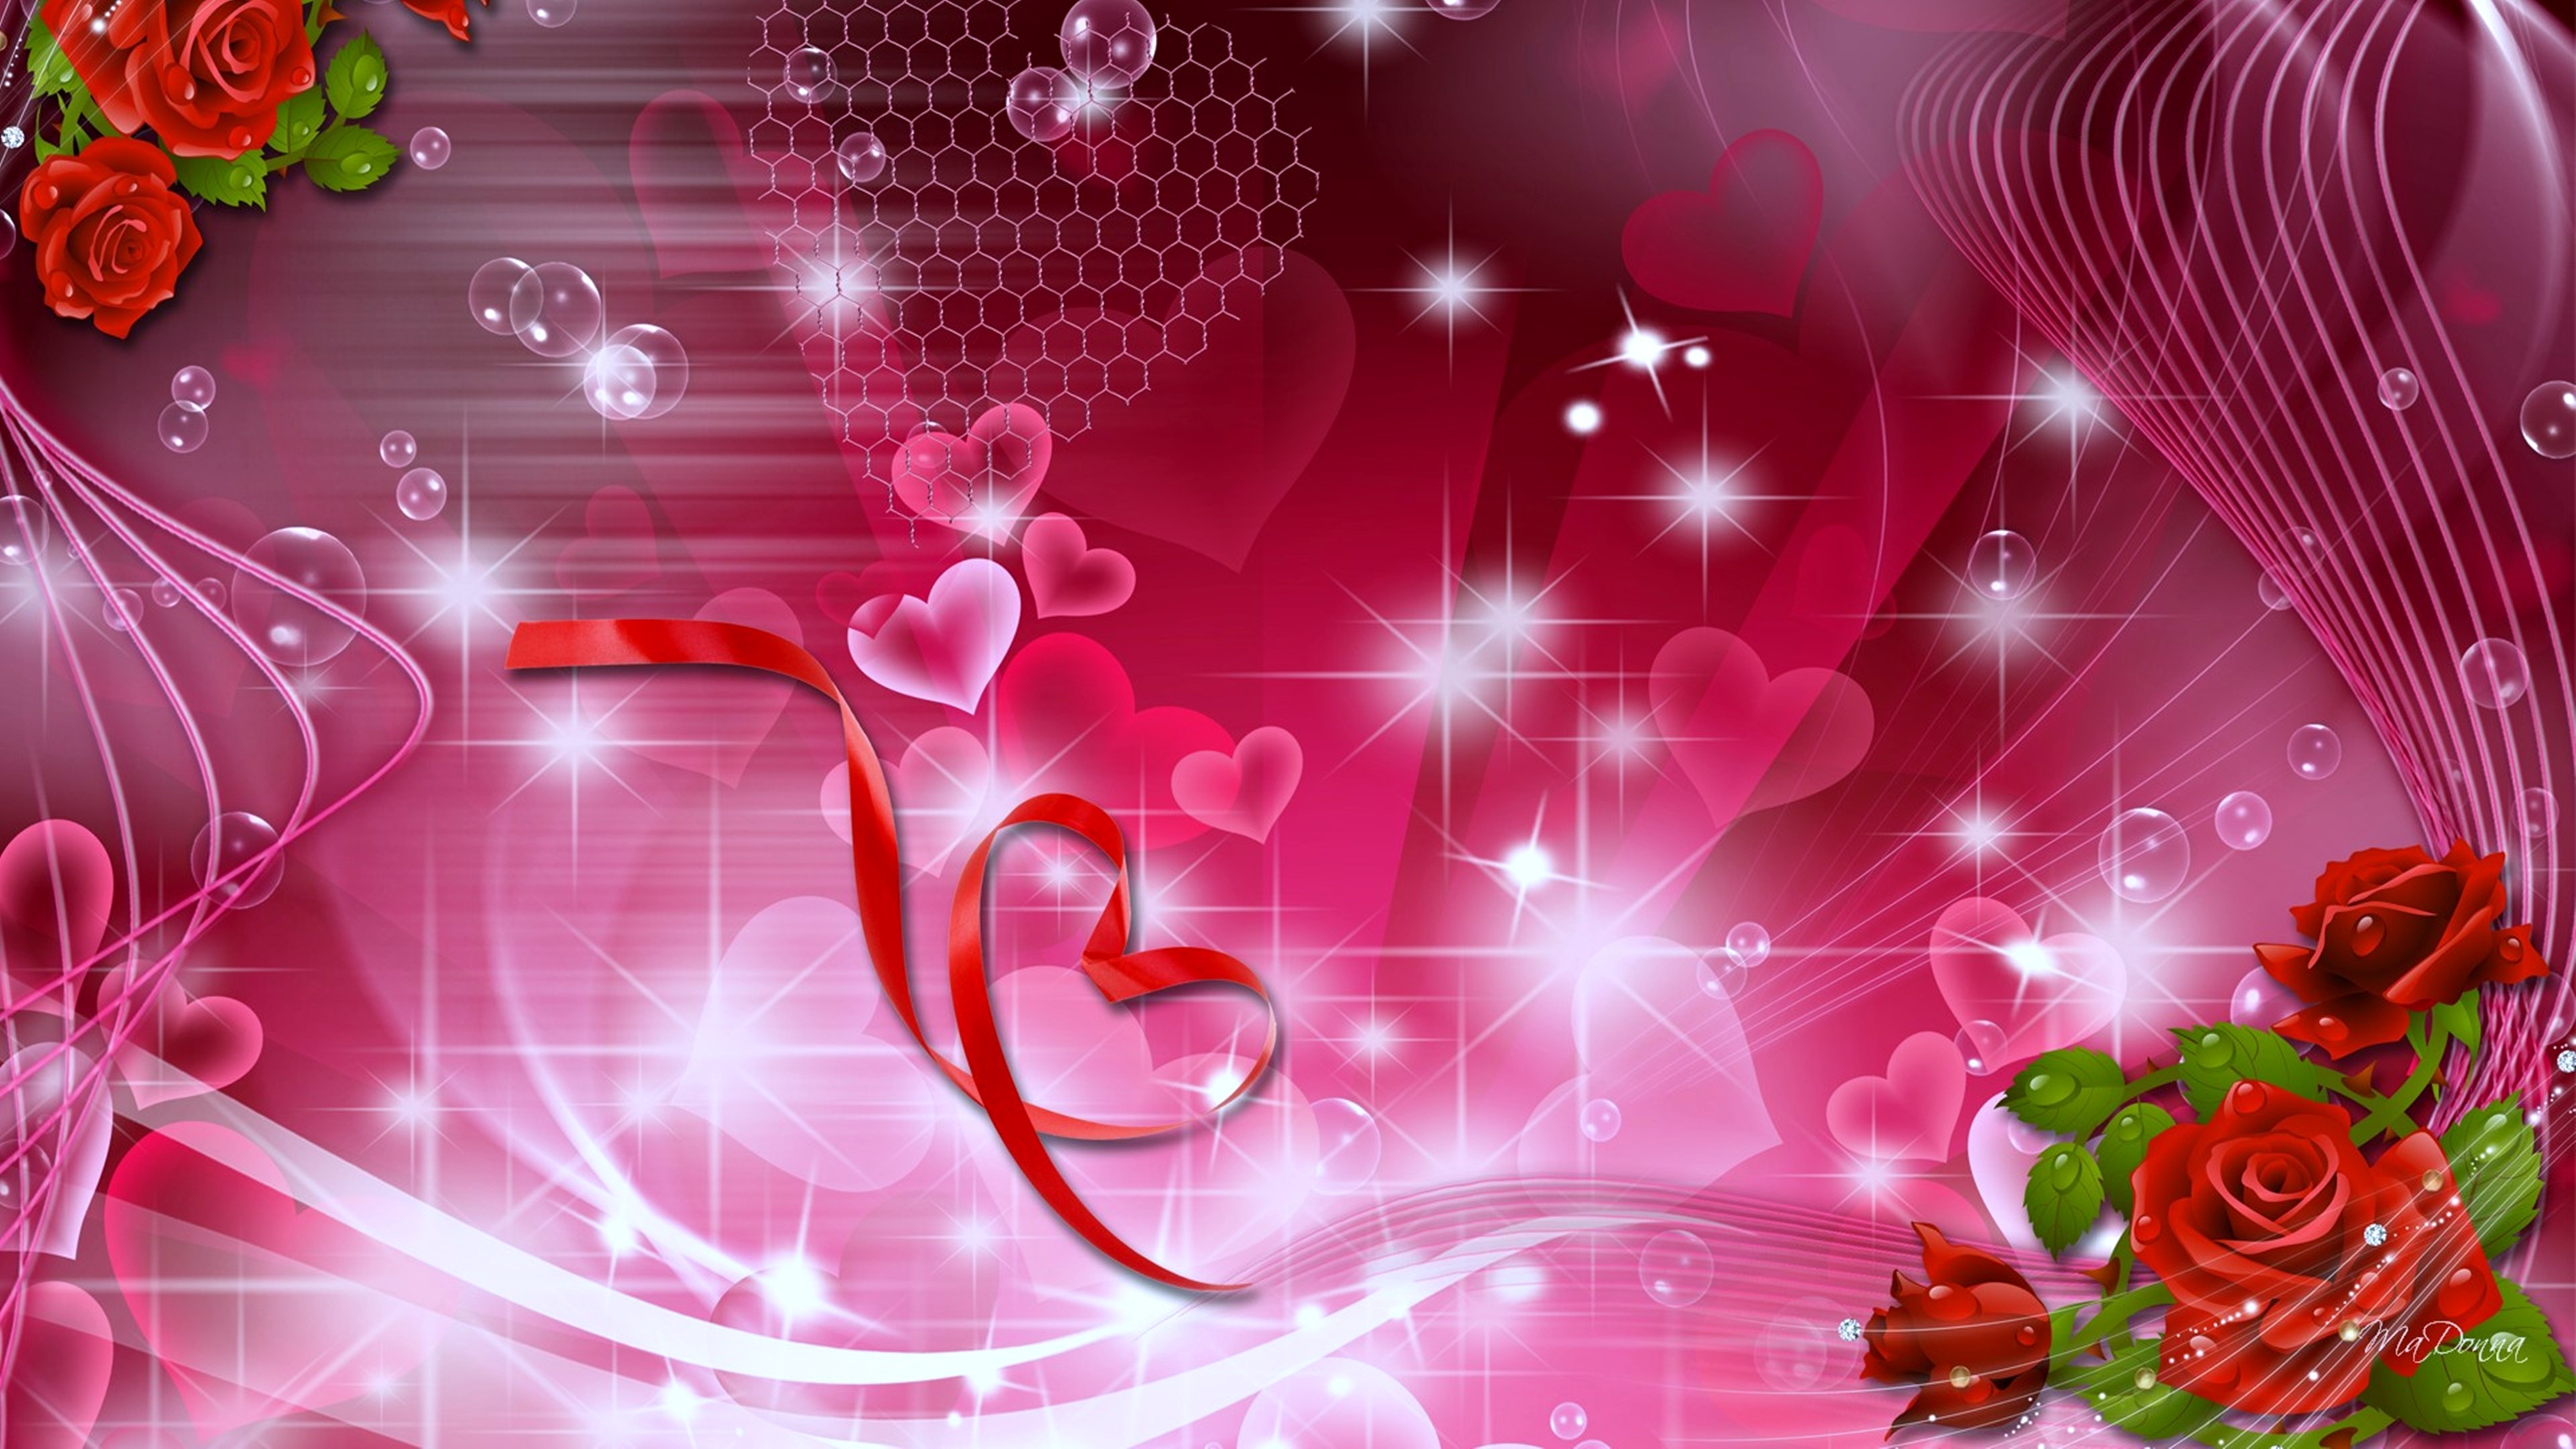  Love  wallpaper   Download free beautiful backgrounds  for 